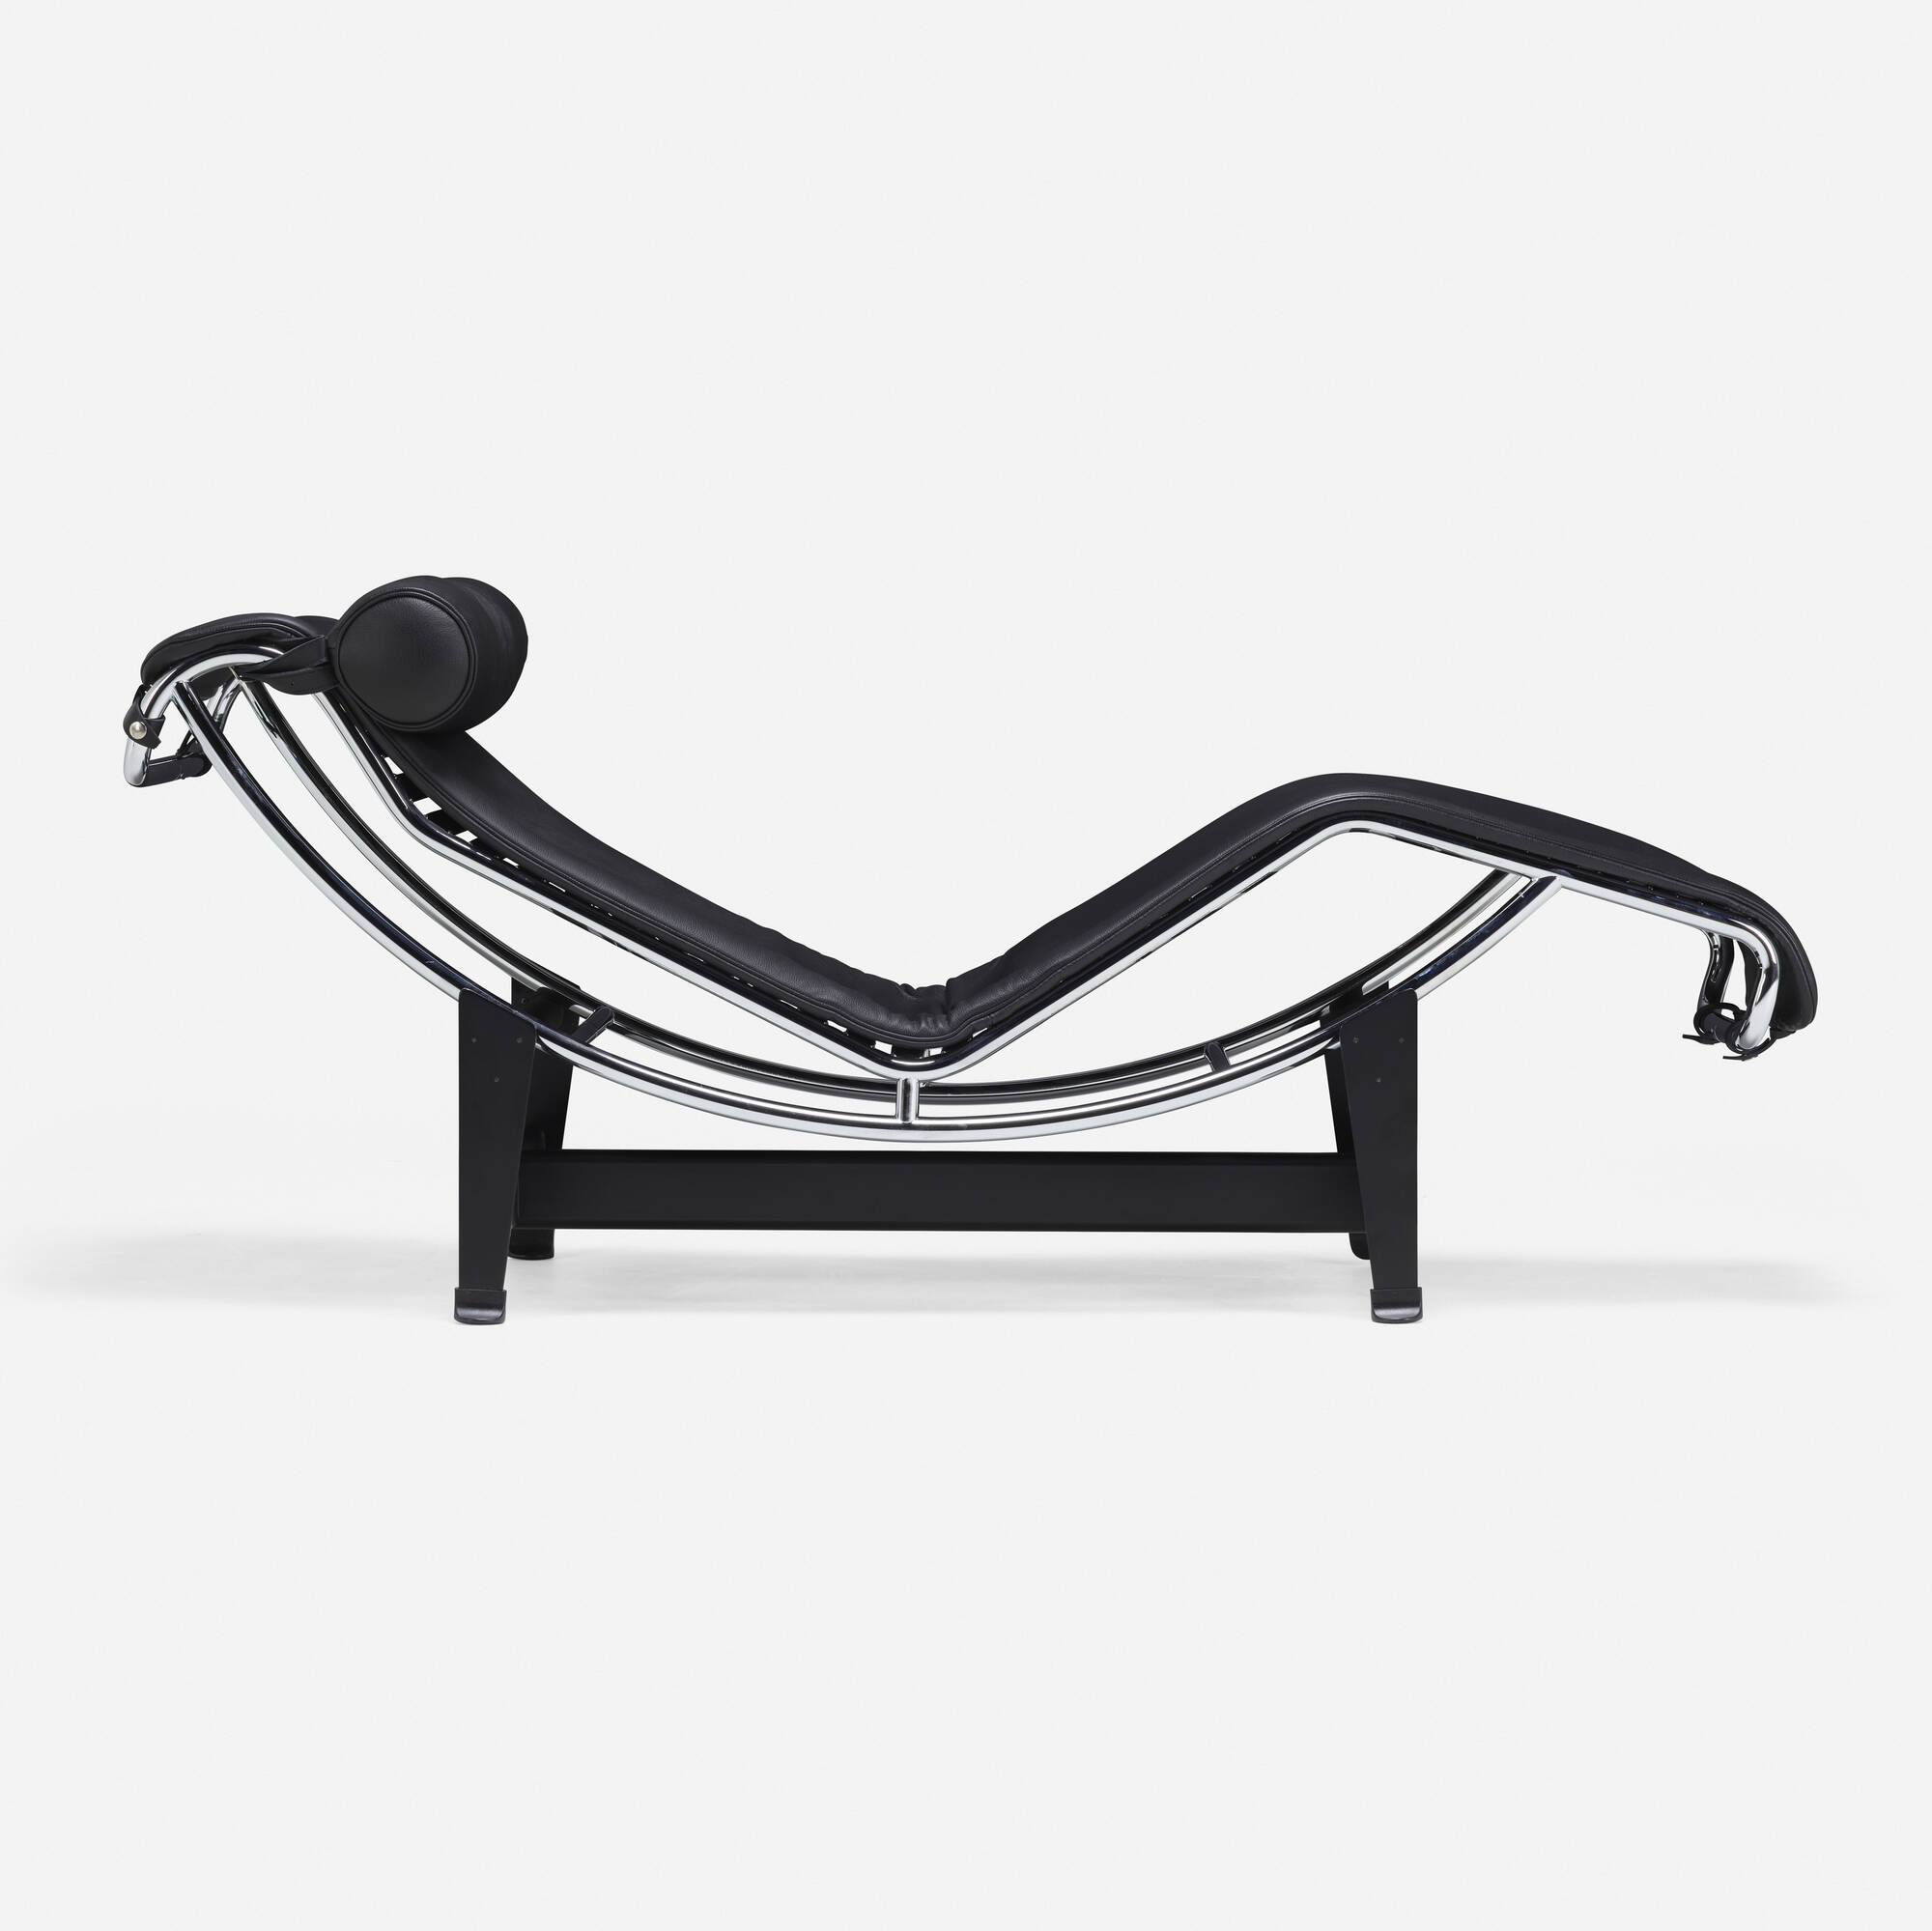 333: CHARLOTTE PERRIAND, PIERRE JEANNERET AND LE CORBUSIER, LC4